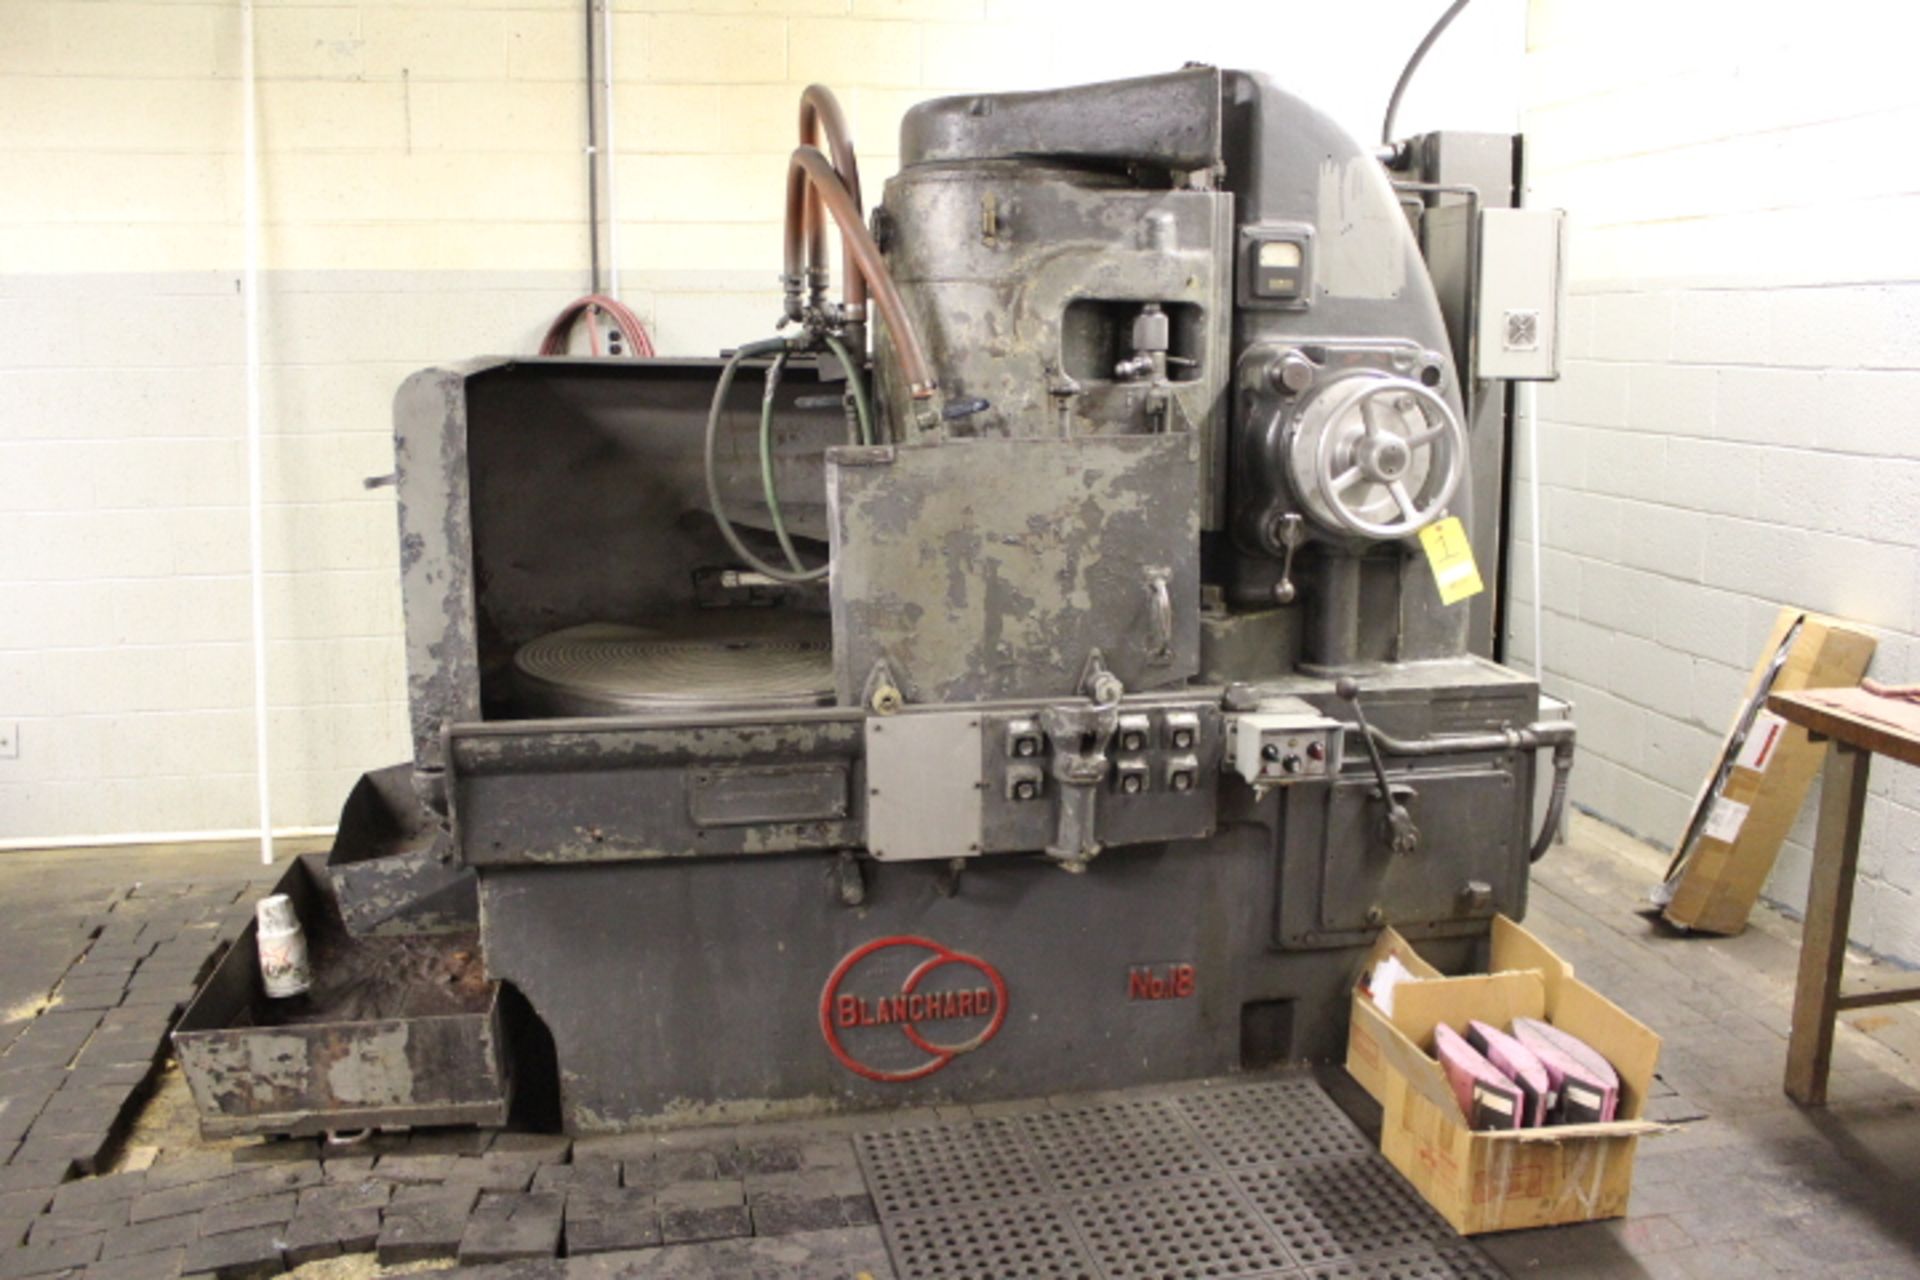 1955 BLANCHARD 18-36 ROTARY SURFACE GRINDER, 25 HP, 7/16 IN CHUCK, 15 IN. HT UNDER WHEEL, S/N 8735.